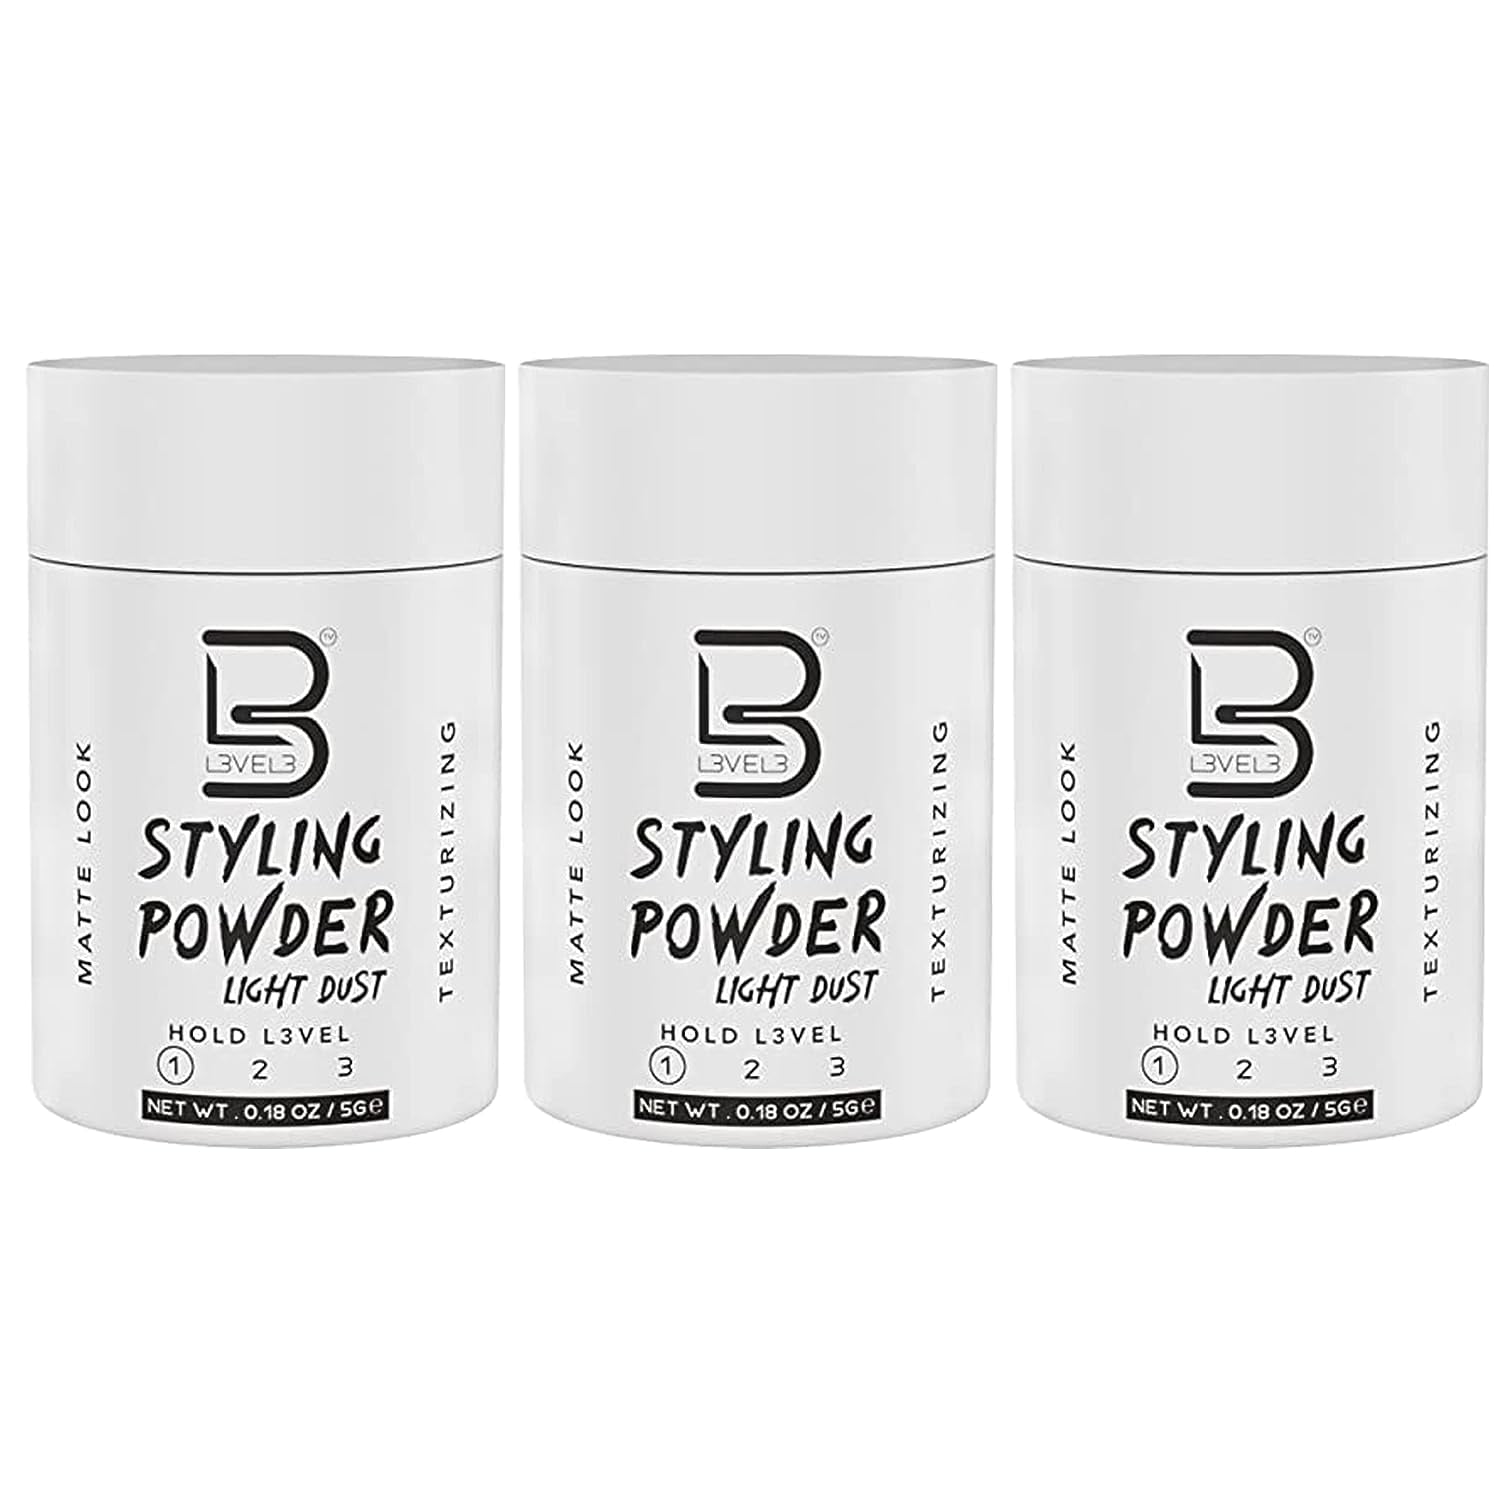 L3 Level 3 Styling Powder & Styling Comb Set - Easy to Apply with No Oil or  Greasy Residue - Professional Salon Look - Lightweight and Ergonomic 